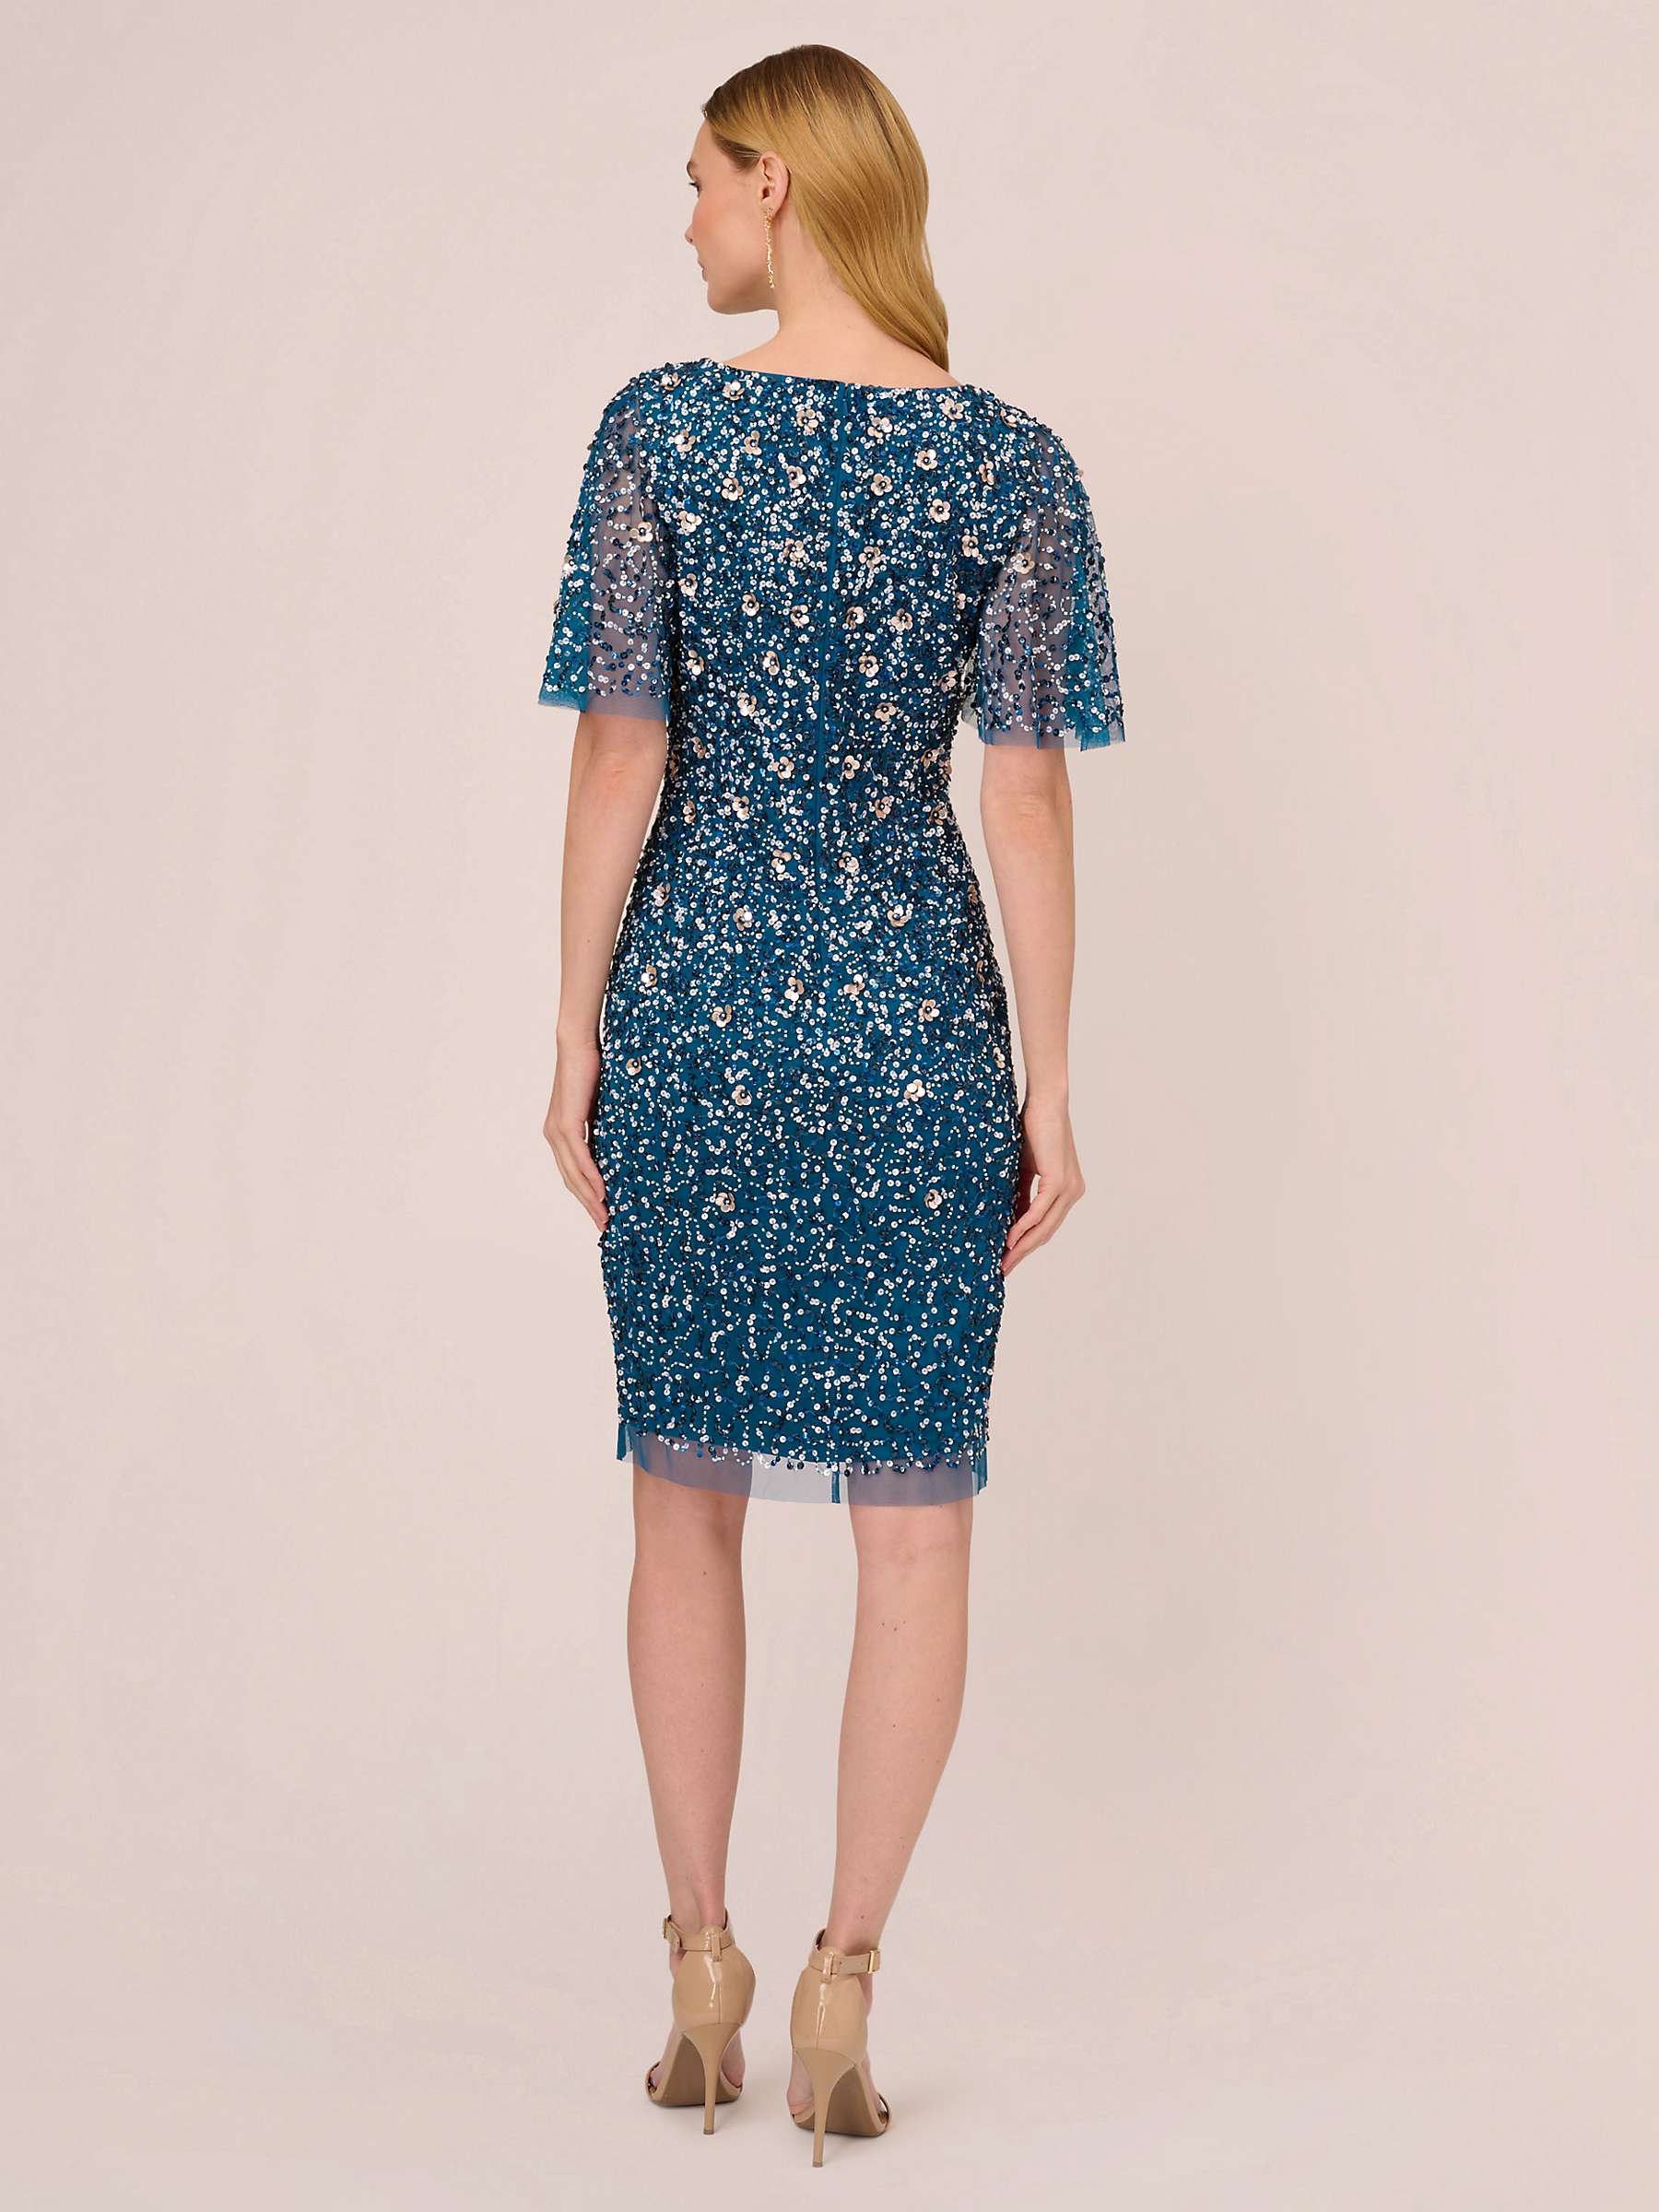 Buy Adrianna Papell Floral Beaded V-Neckline Dress, Teal Sapphire Online at johnlewis.com